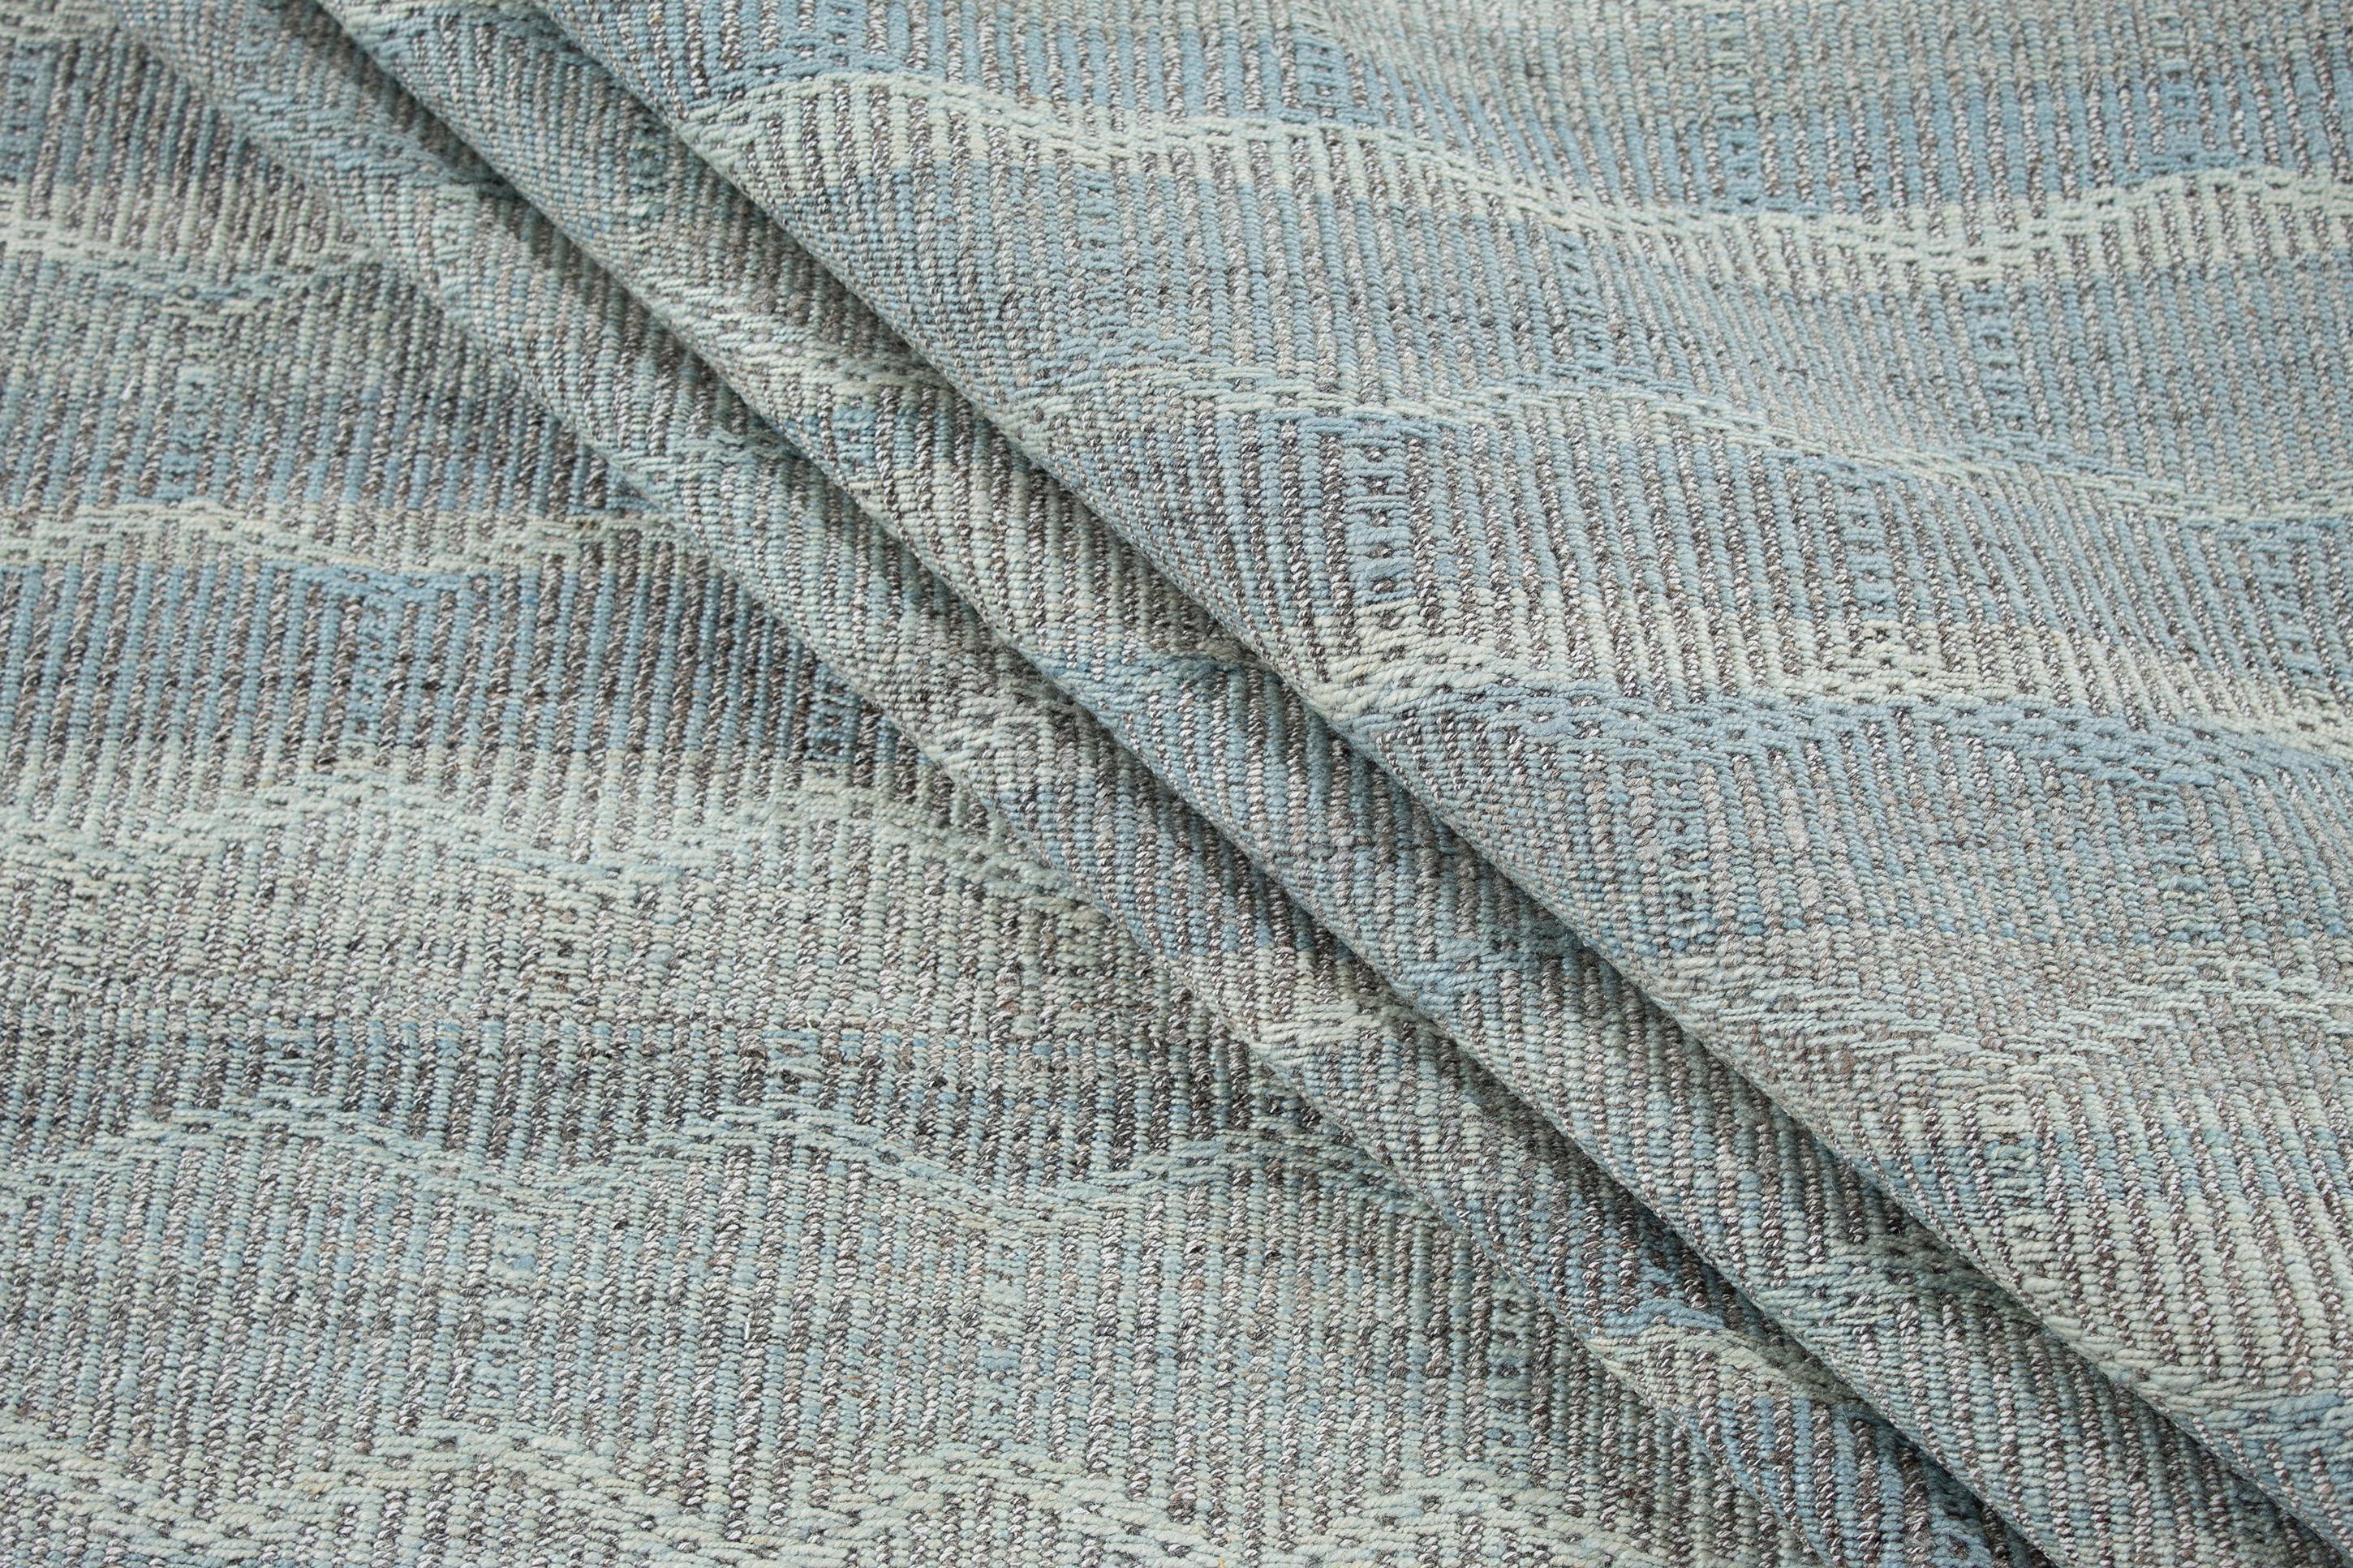 Hand-Woven Mid-Century Modern Handwoven Flat-Weave Honeycomb Pattern Rug in Grey and Blue For Sale